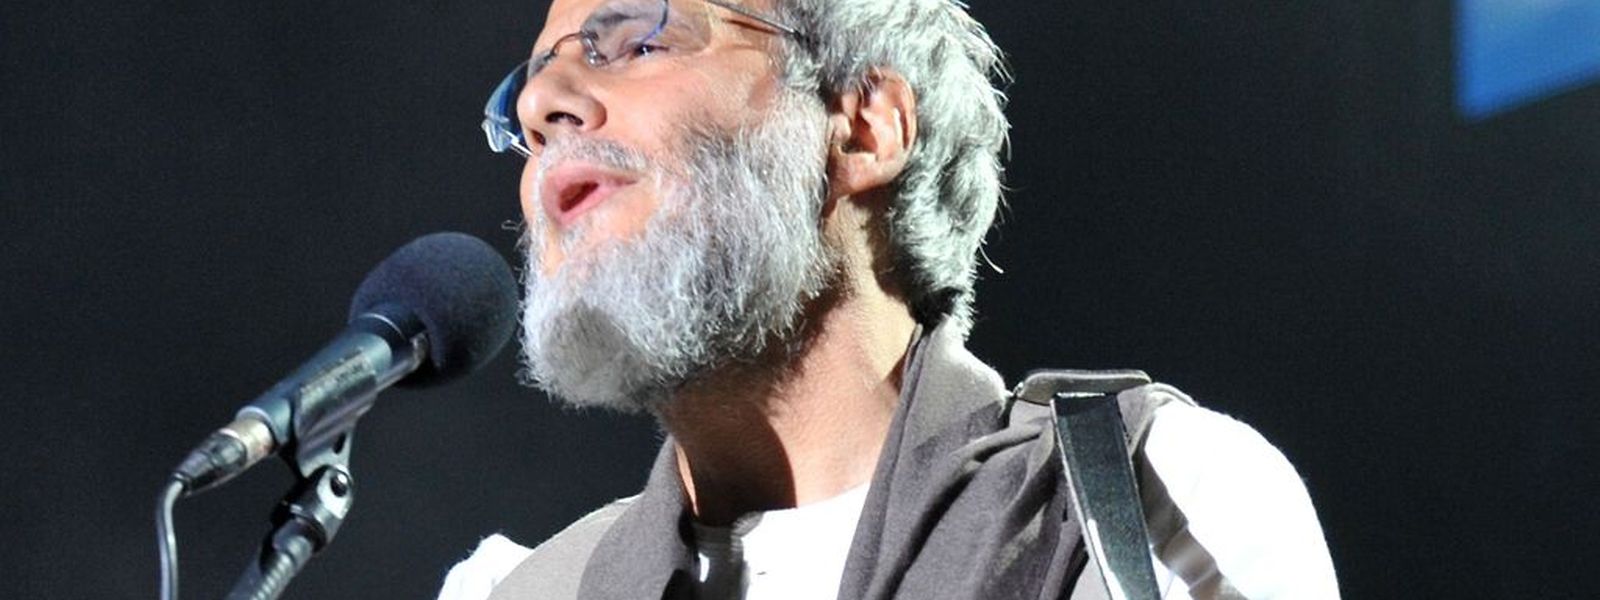 Singer Cat Stevens, also known as Yusuf Islam, performs during the 10th edition of the Mawazine international music festival "World Rythms" in Rabat on May 23, 2011 AFP PHOTO / FADEL